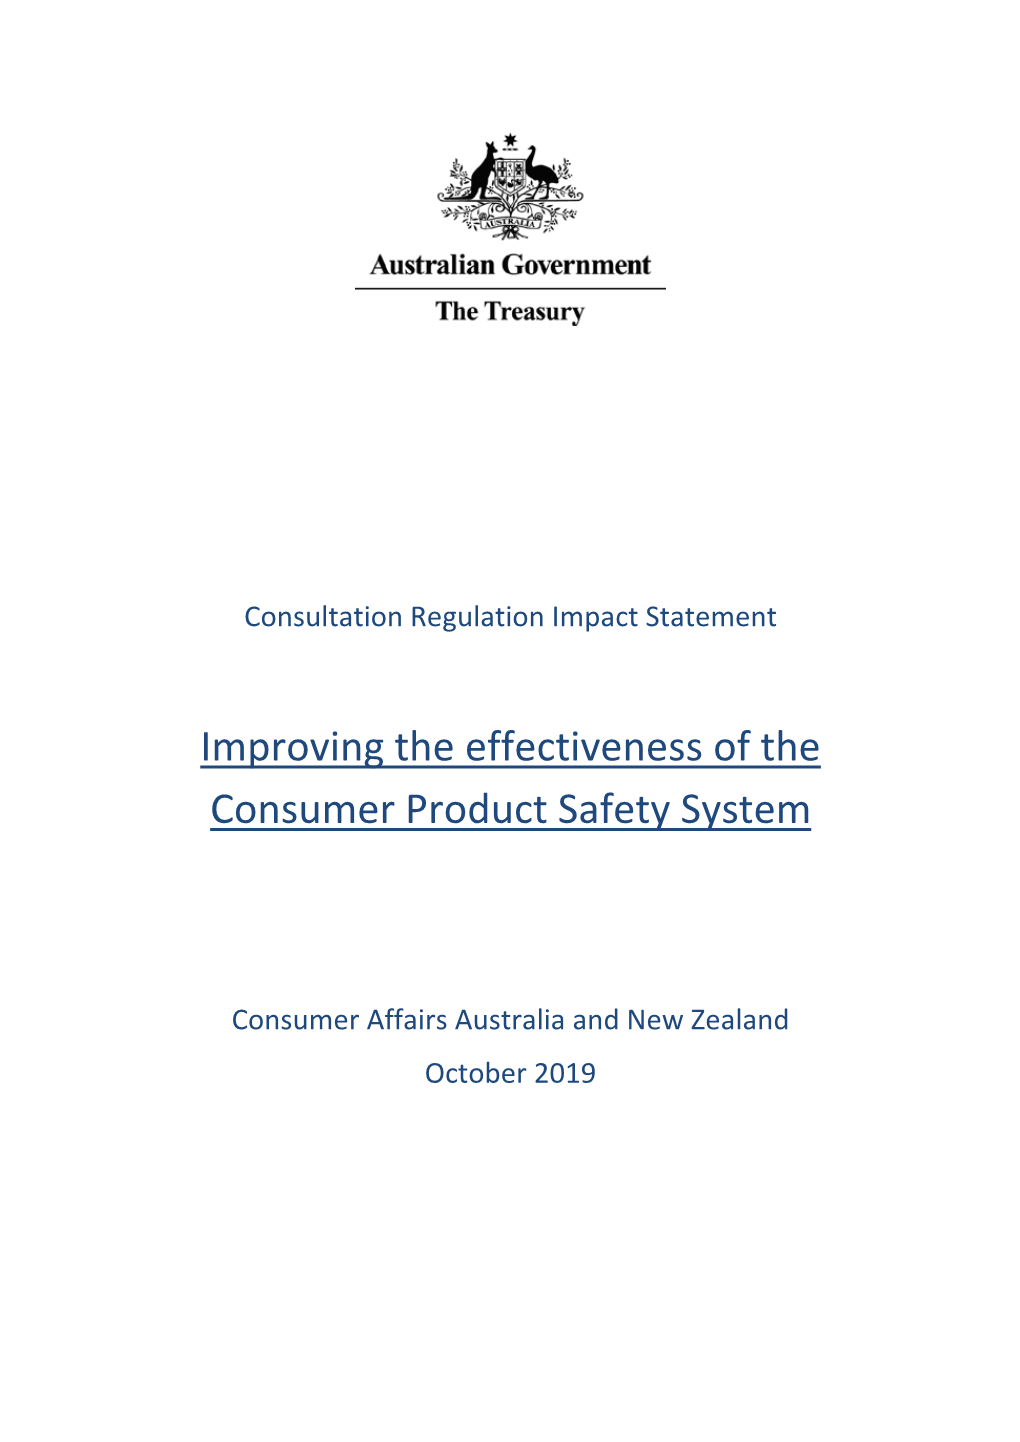 Improving the Effectiveness of the Consumer Product Safety System